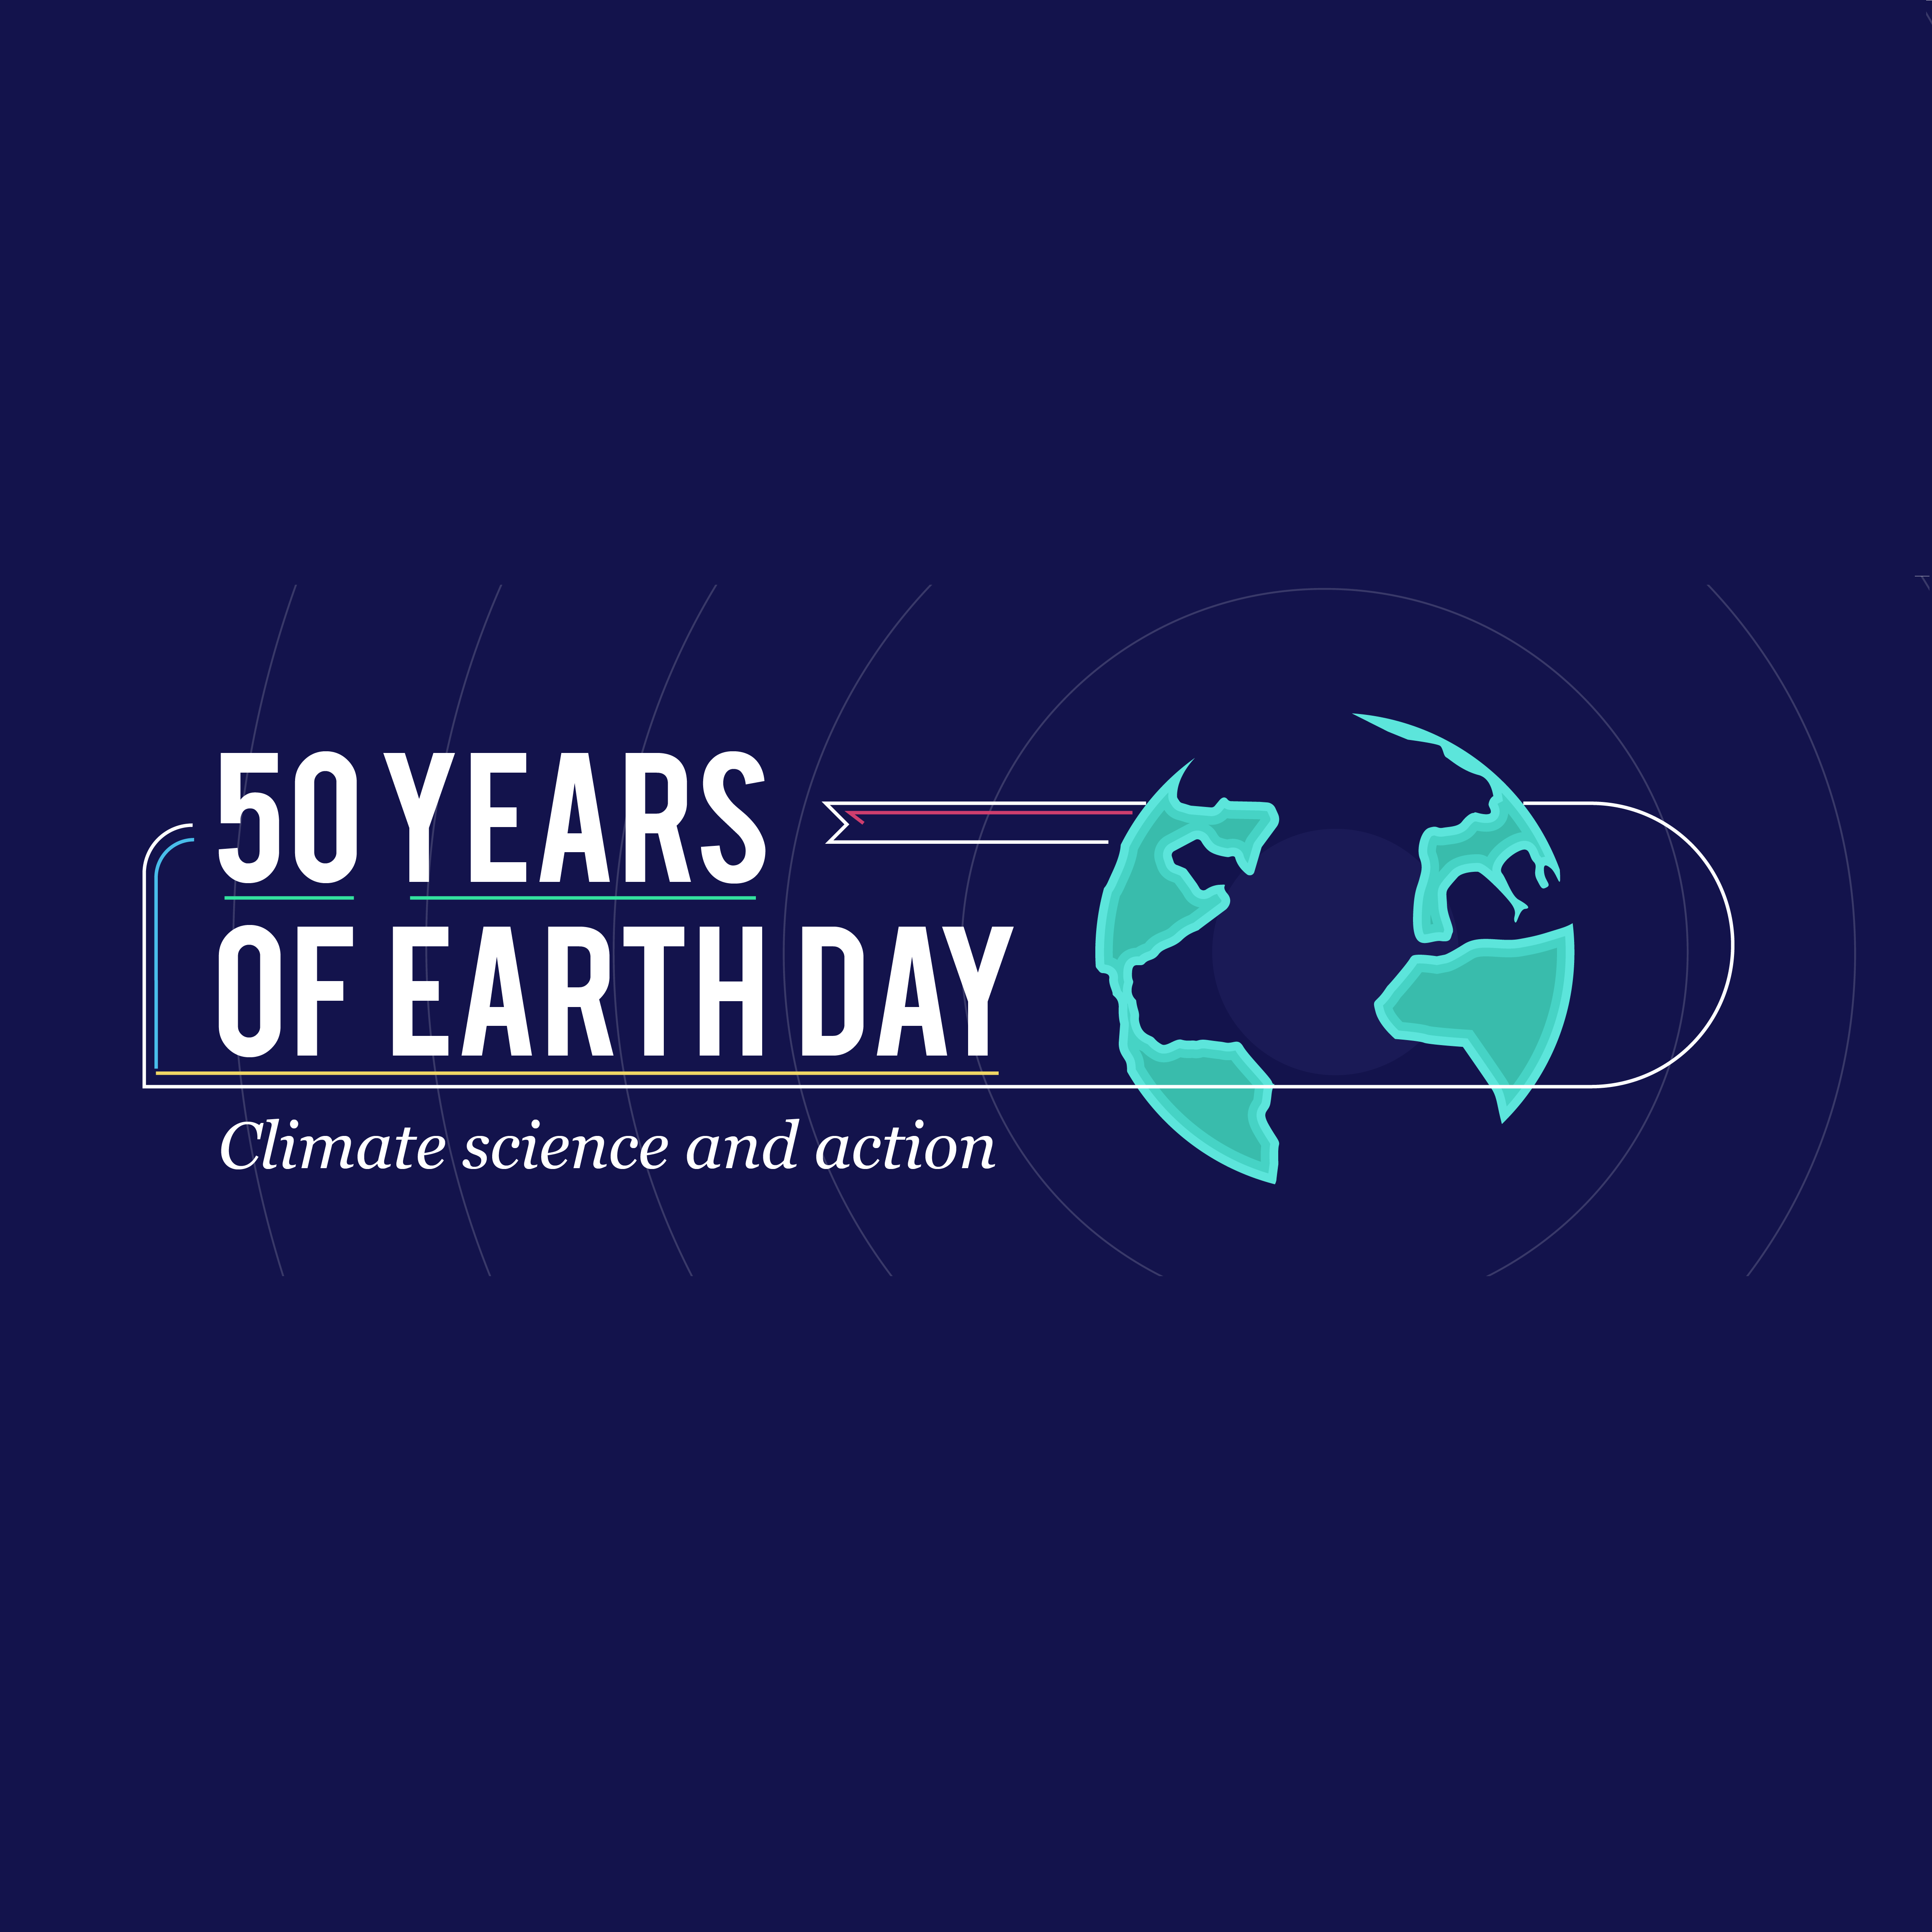 Earth Day 2020 calls for climate action